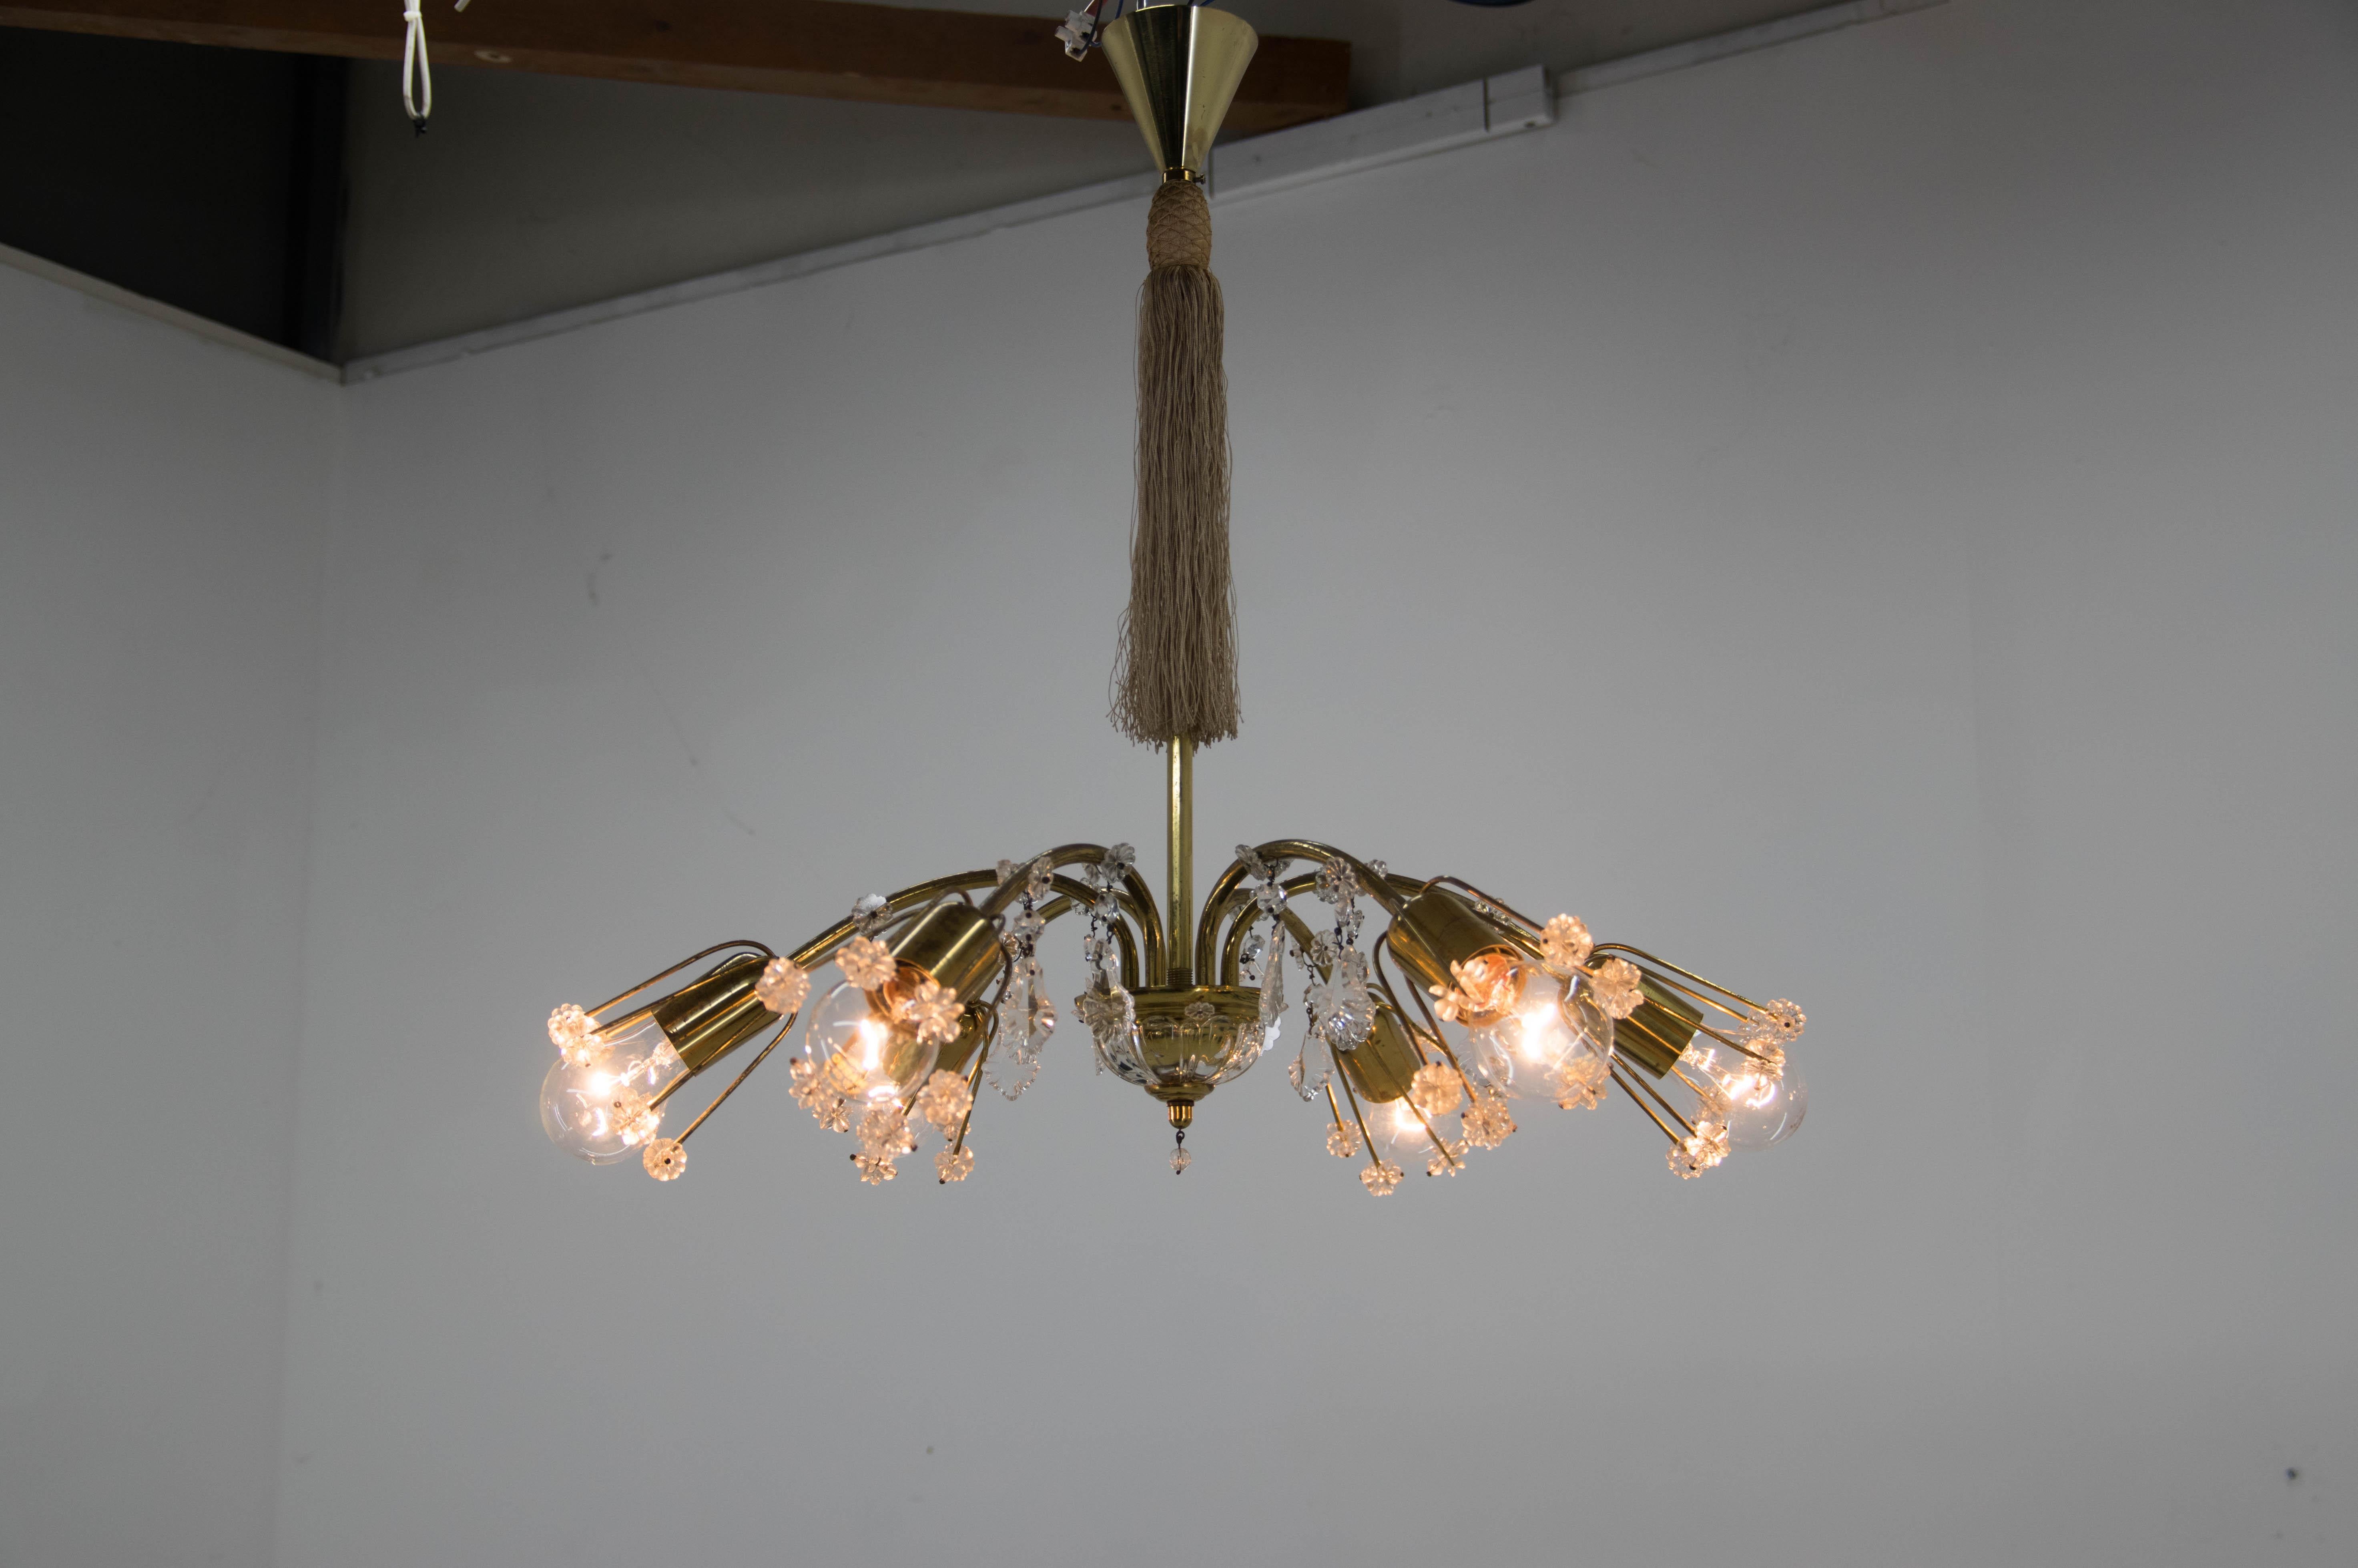 Designed in 1950s by Emil Stejnar and executed by Rupert Nikoll. Lacquered brass with minor age patina. No crystal parts missing. New ceiling canopy.
Rewired: 6x40W, E25-E27 bulbs.
US wiring compatible.